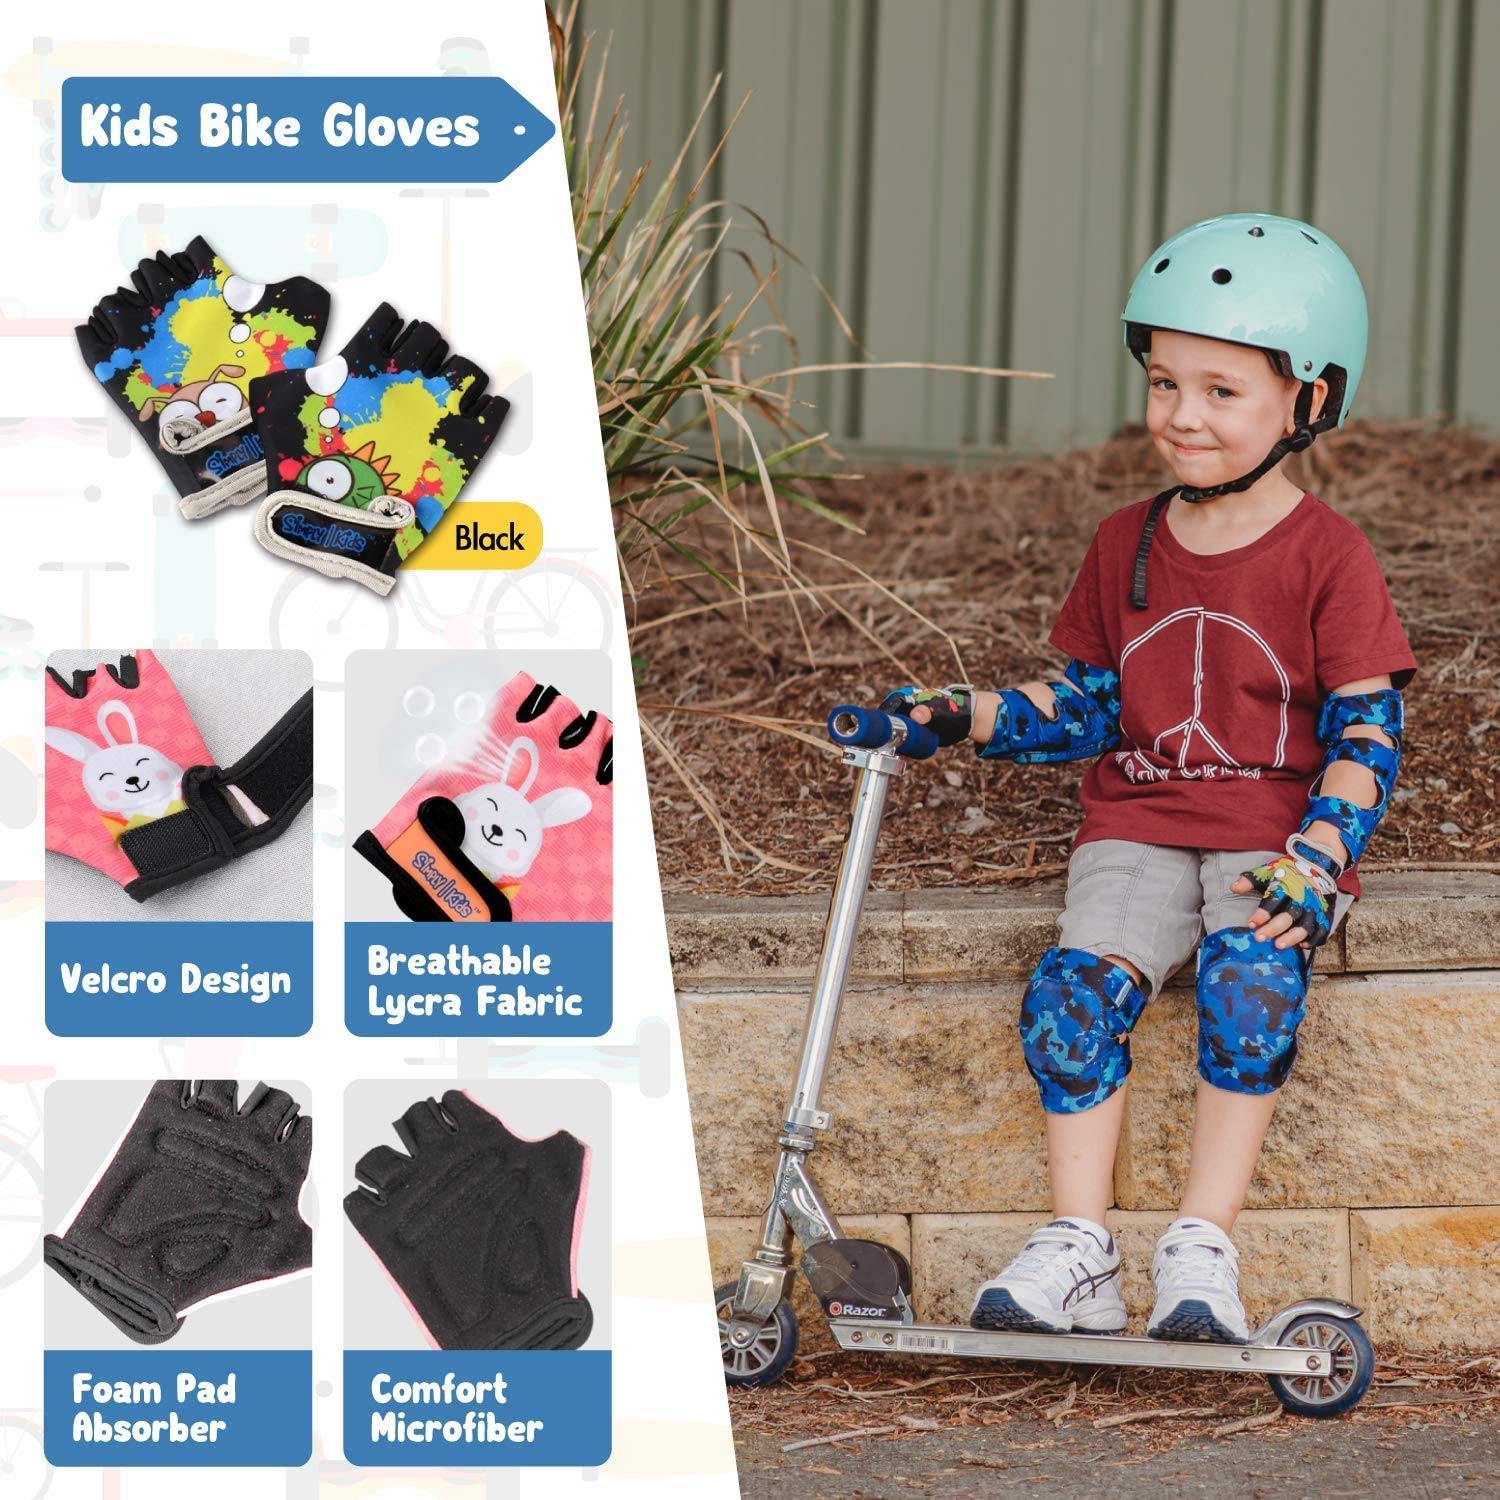 [1st Gen.] Innovative Soft Kids Elbow and Knee Pads with Bike Gloves (Shark)